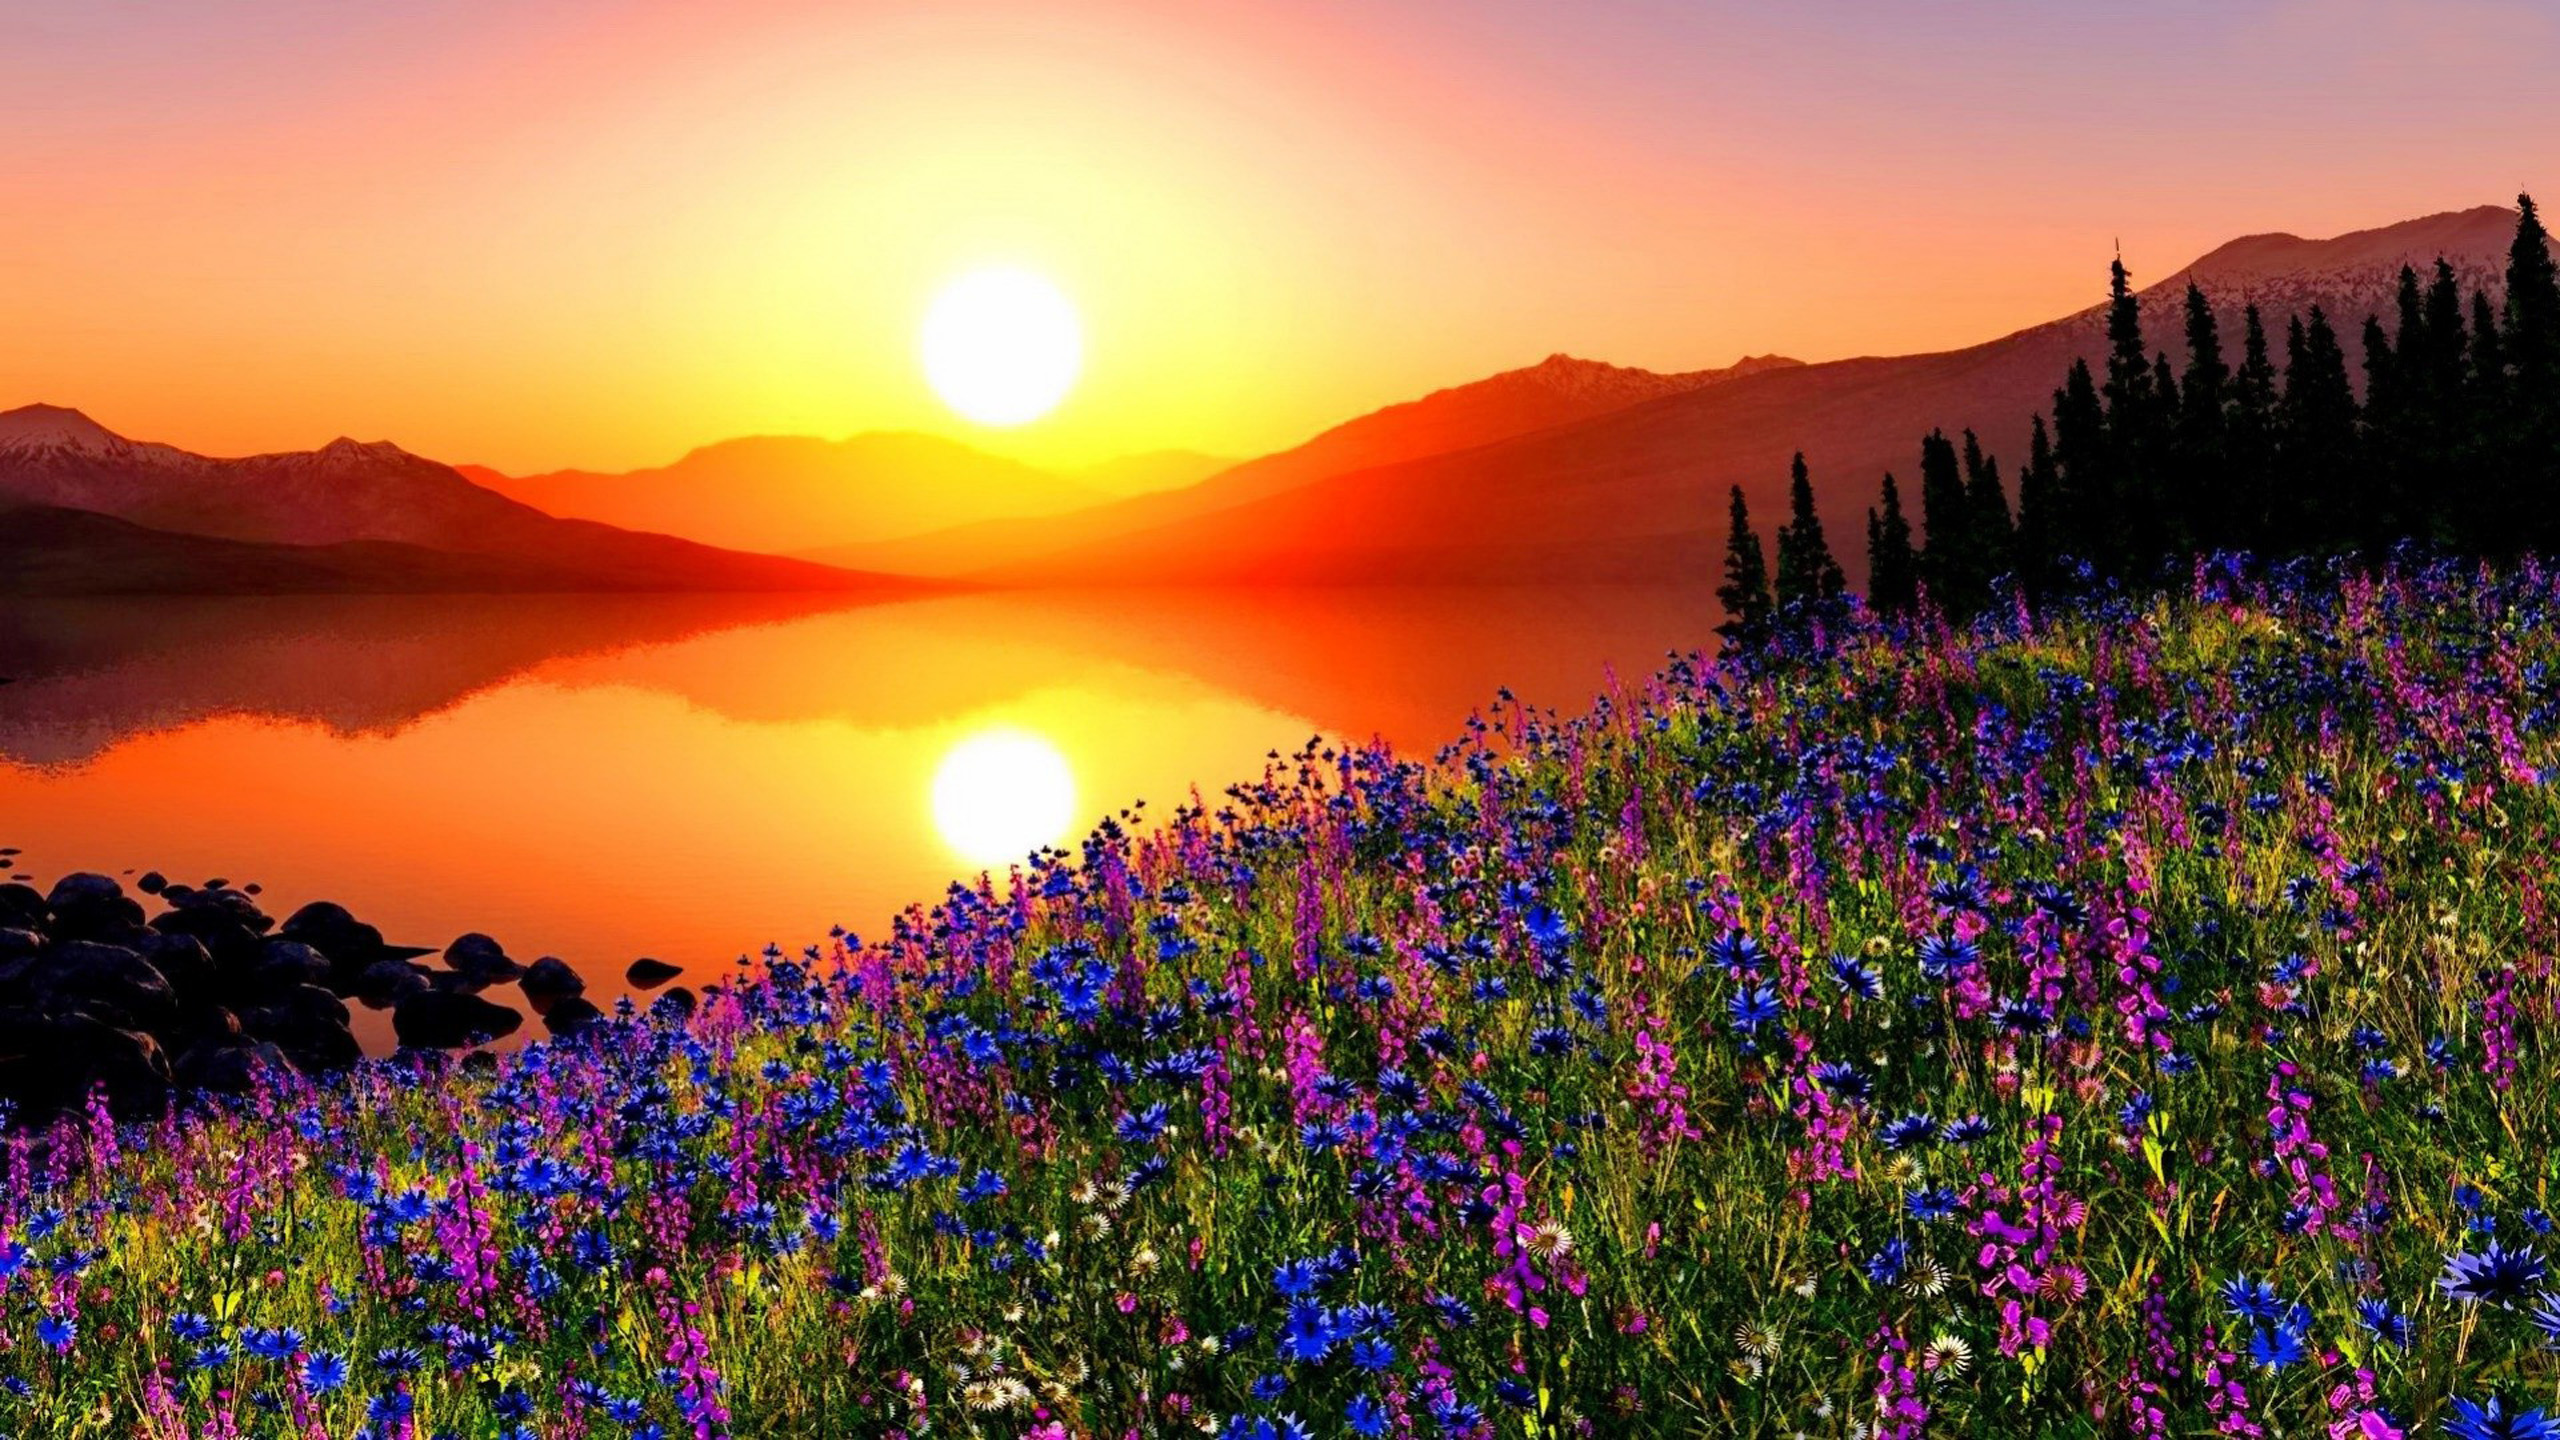 Sunset Mountain Meadow With Flowers, Pine Trees, Mountains, Sky